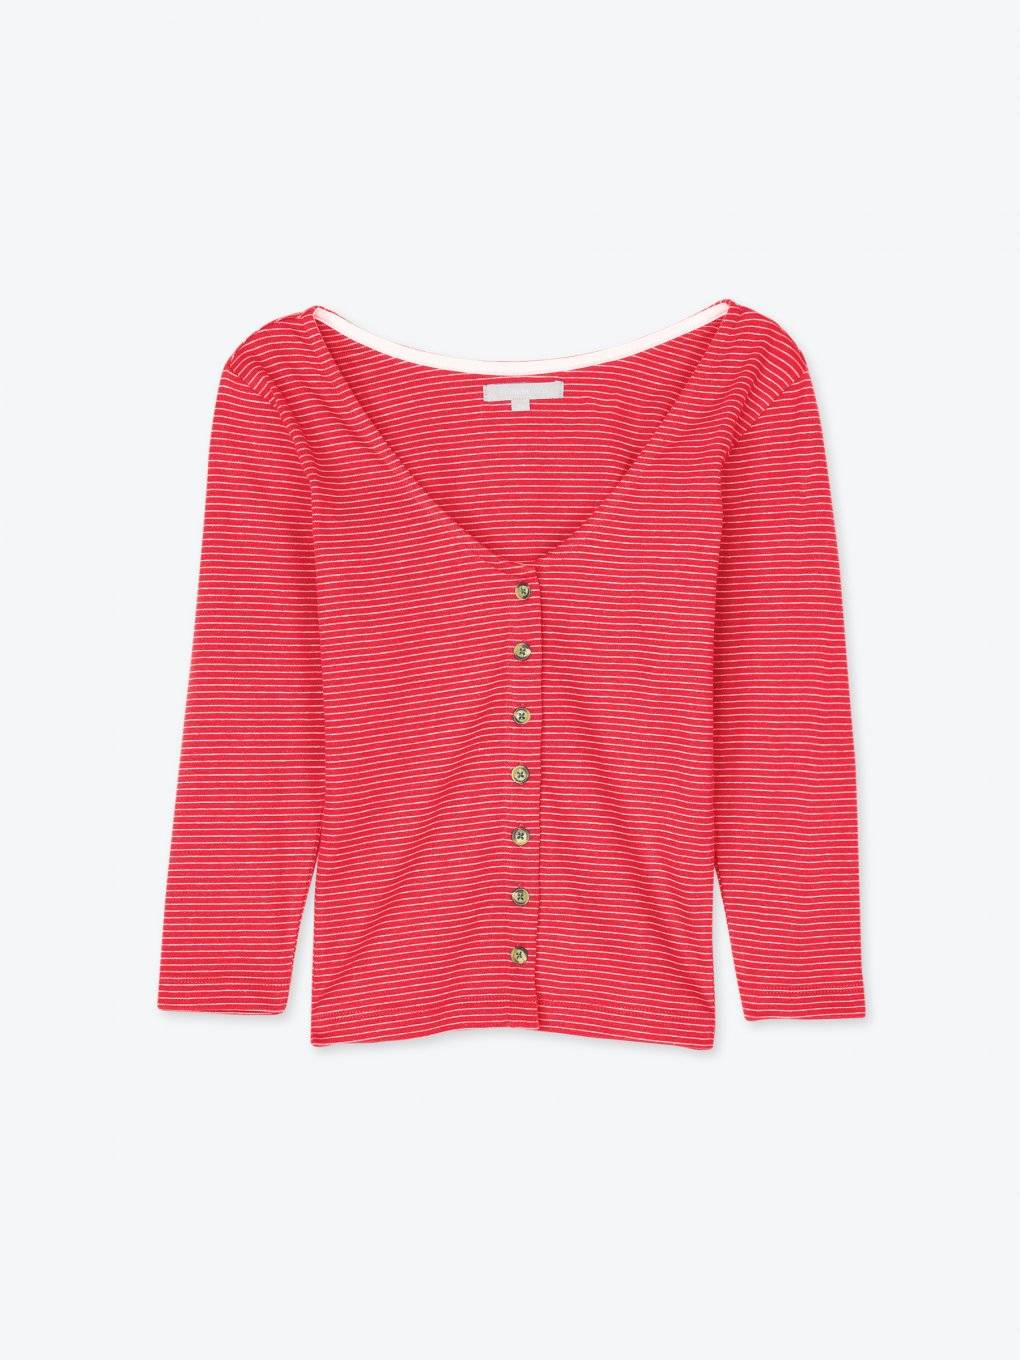 Striped top with front buttons